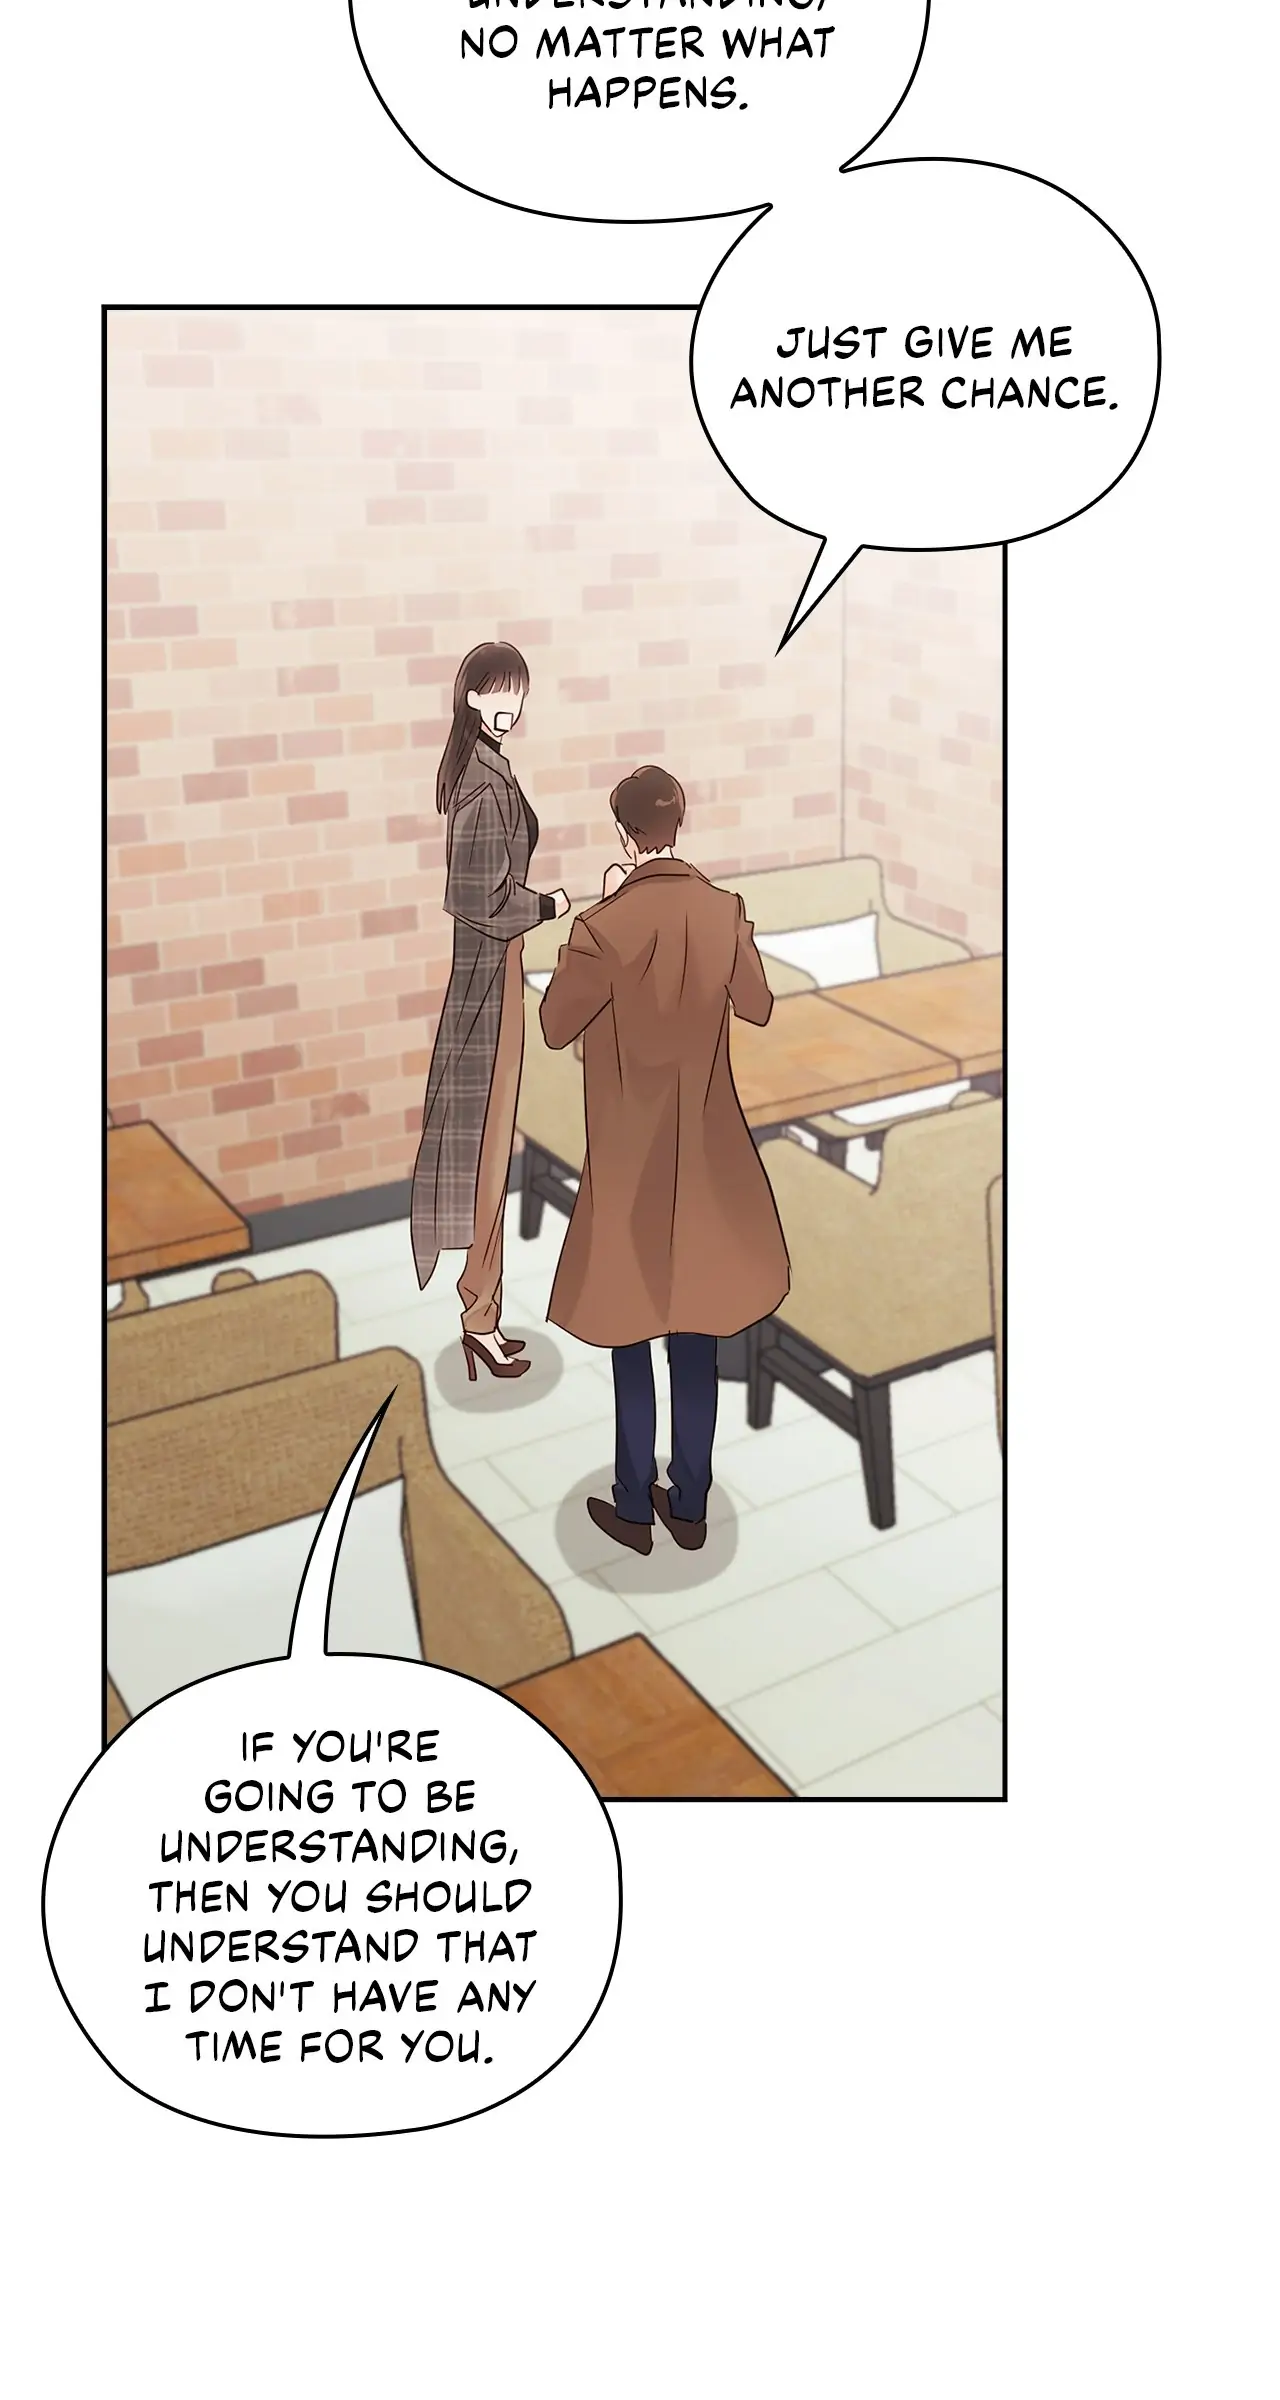 Quiet in the Office! chapter 15